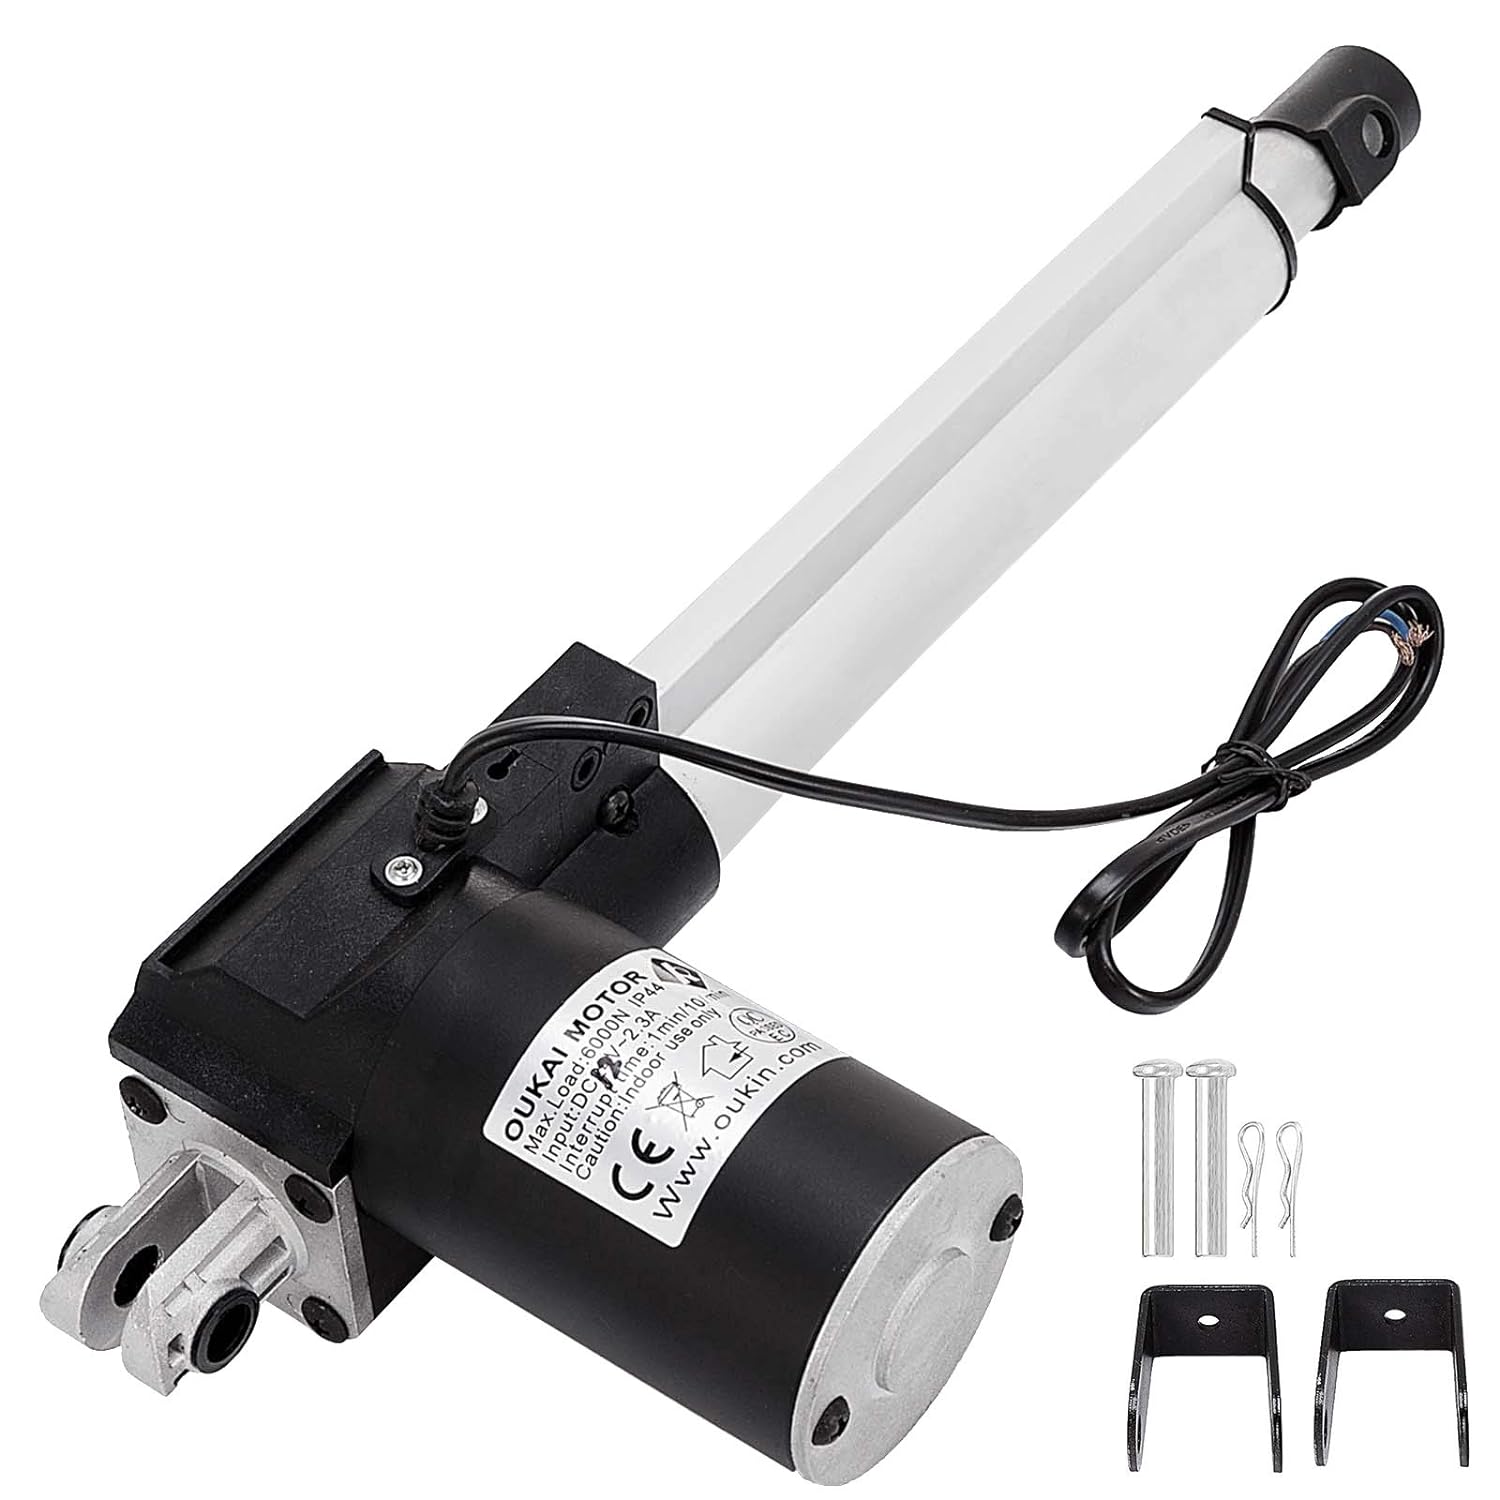 2 Dual 12 Inch Stroke Linear Actuator W/ Brackets Output DC 12V 330lbs Max Lift 